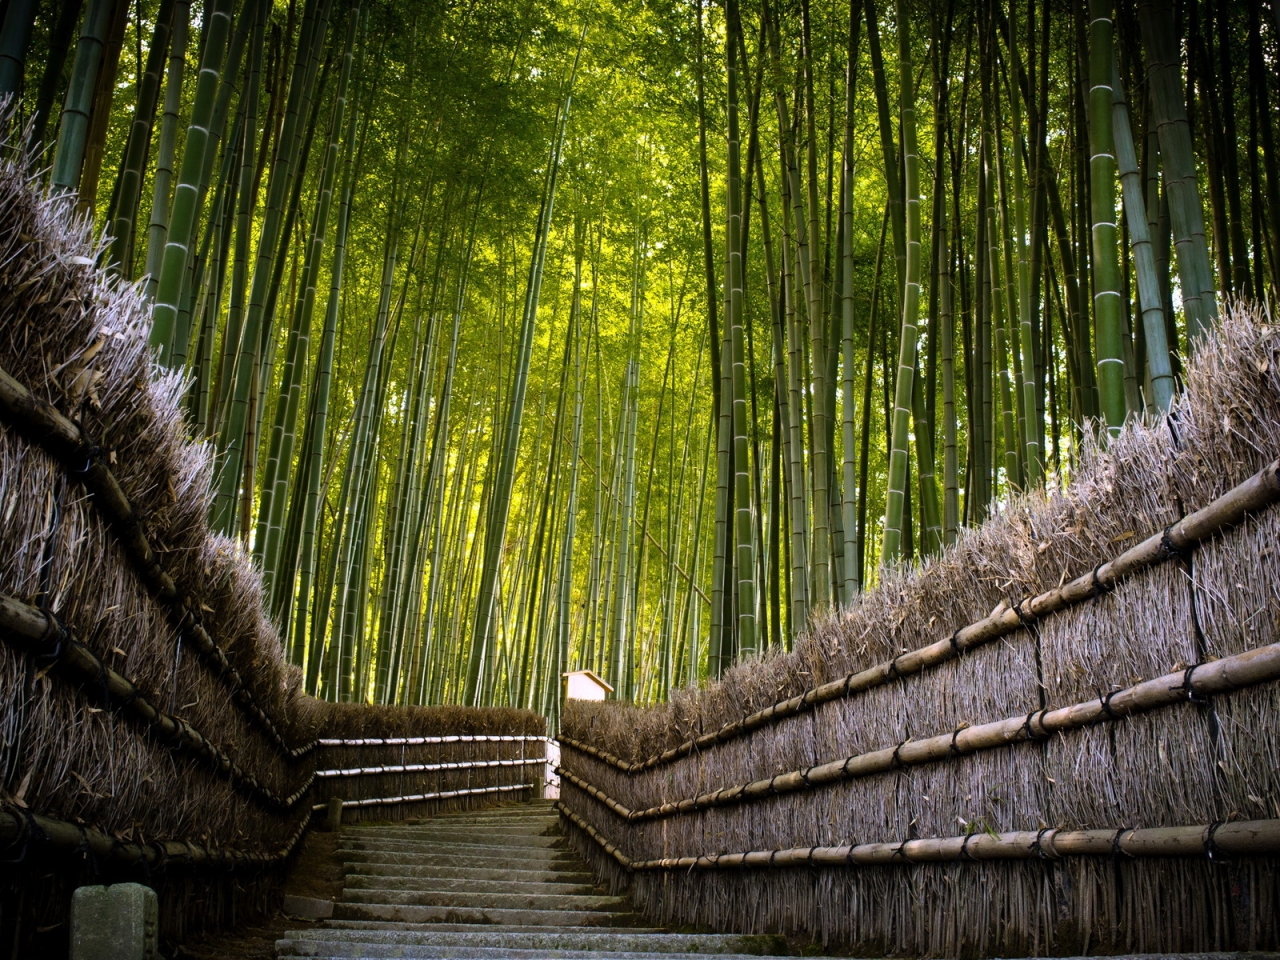 Bamboo Fence for 1280 x 960 resolution